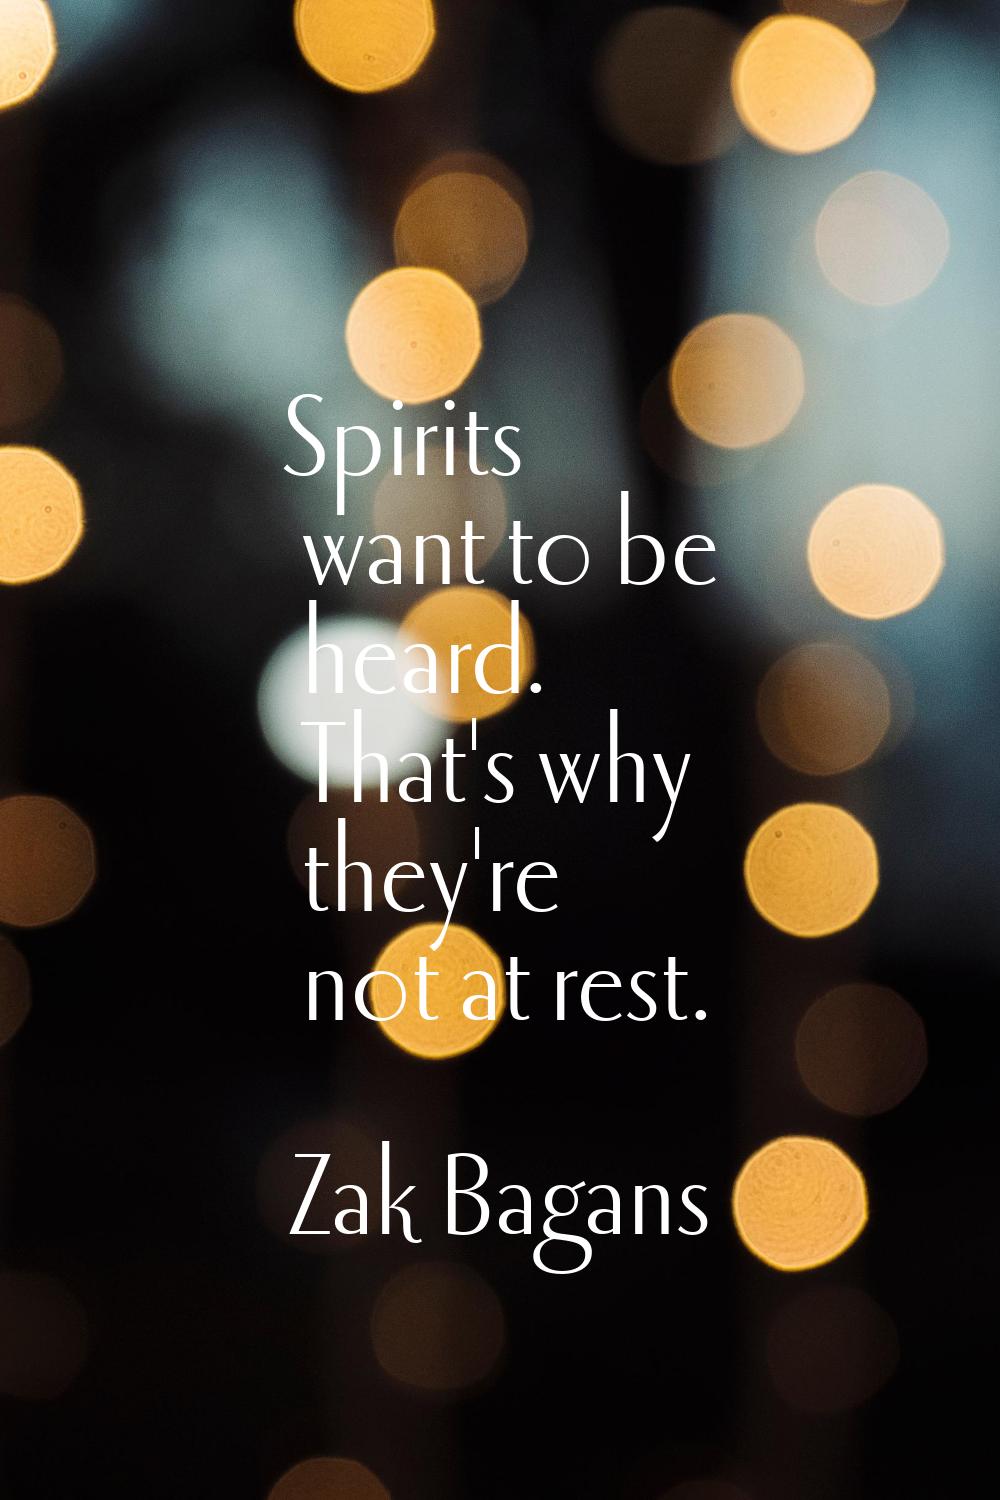 Spirits want to be heard. That's why they're not at rest.